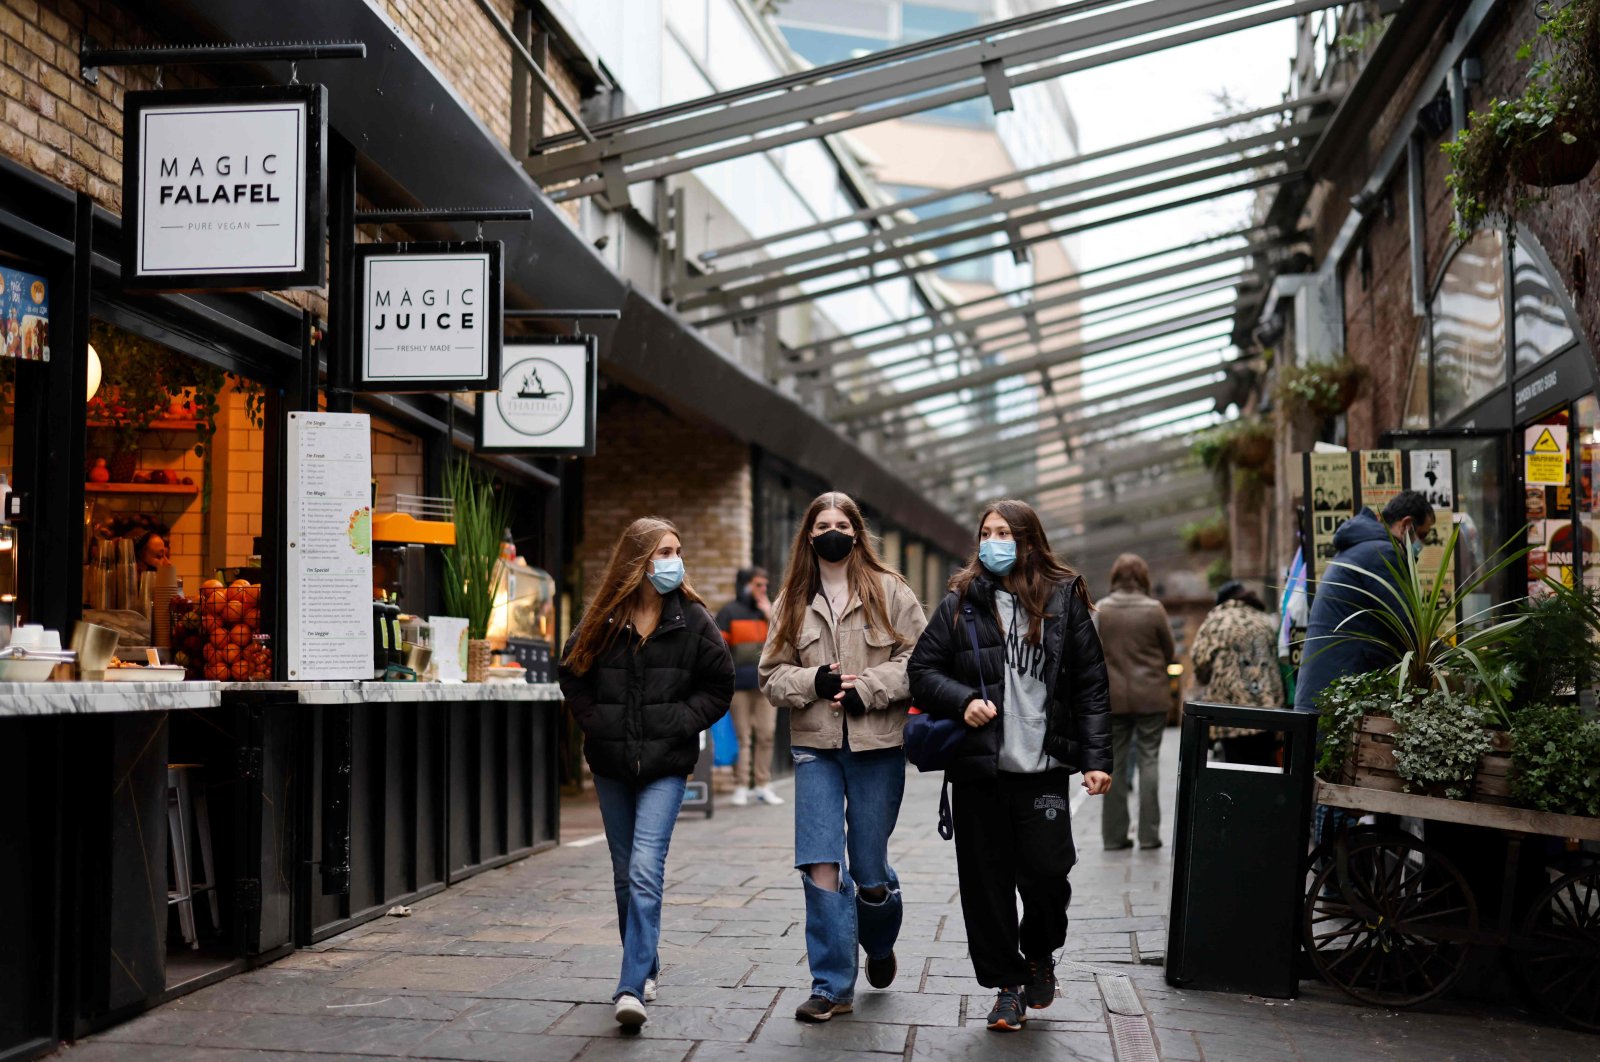 Shoppers wearing face coverings to combat the spread of the coronavirus, walk past stores in Camden Market in London, U.K., Jan. 7, 2022. (AFP Photo)